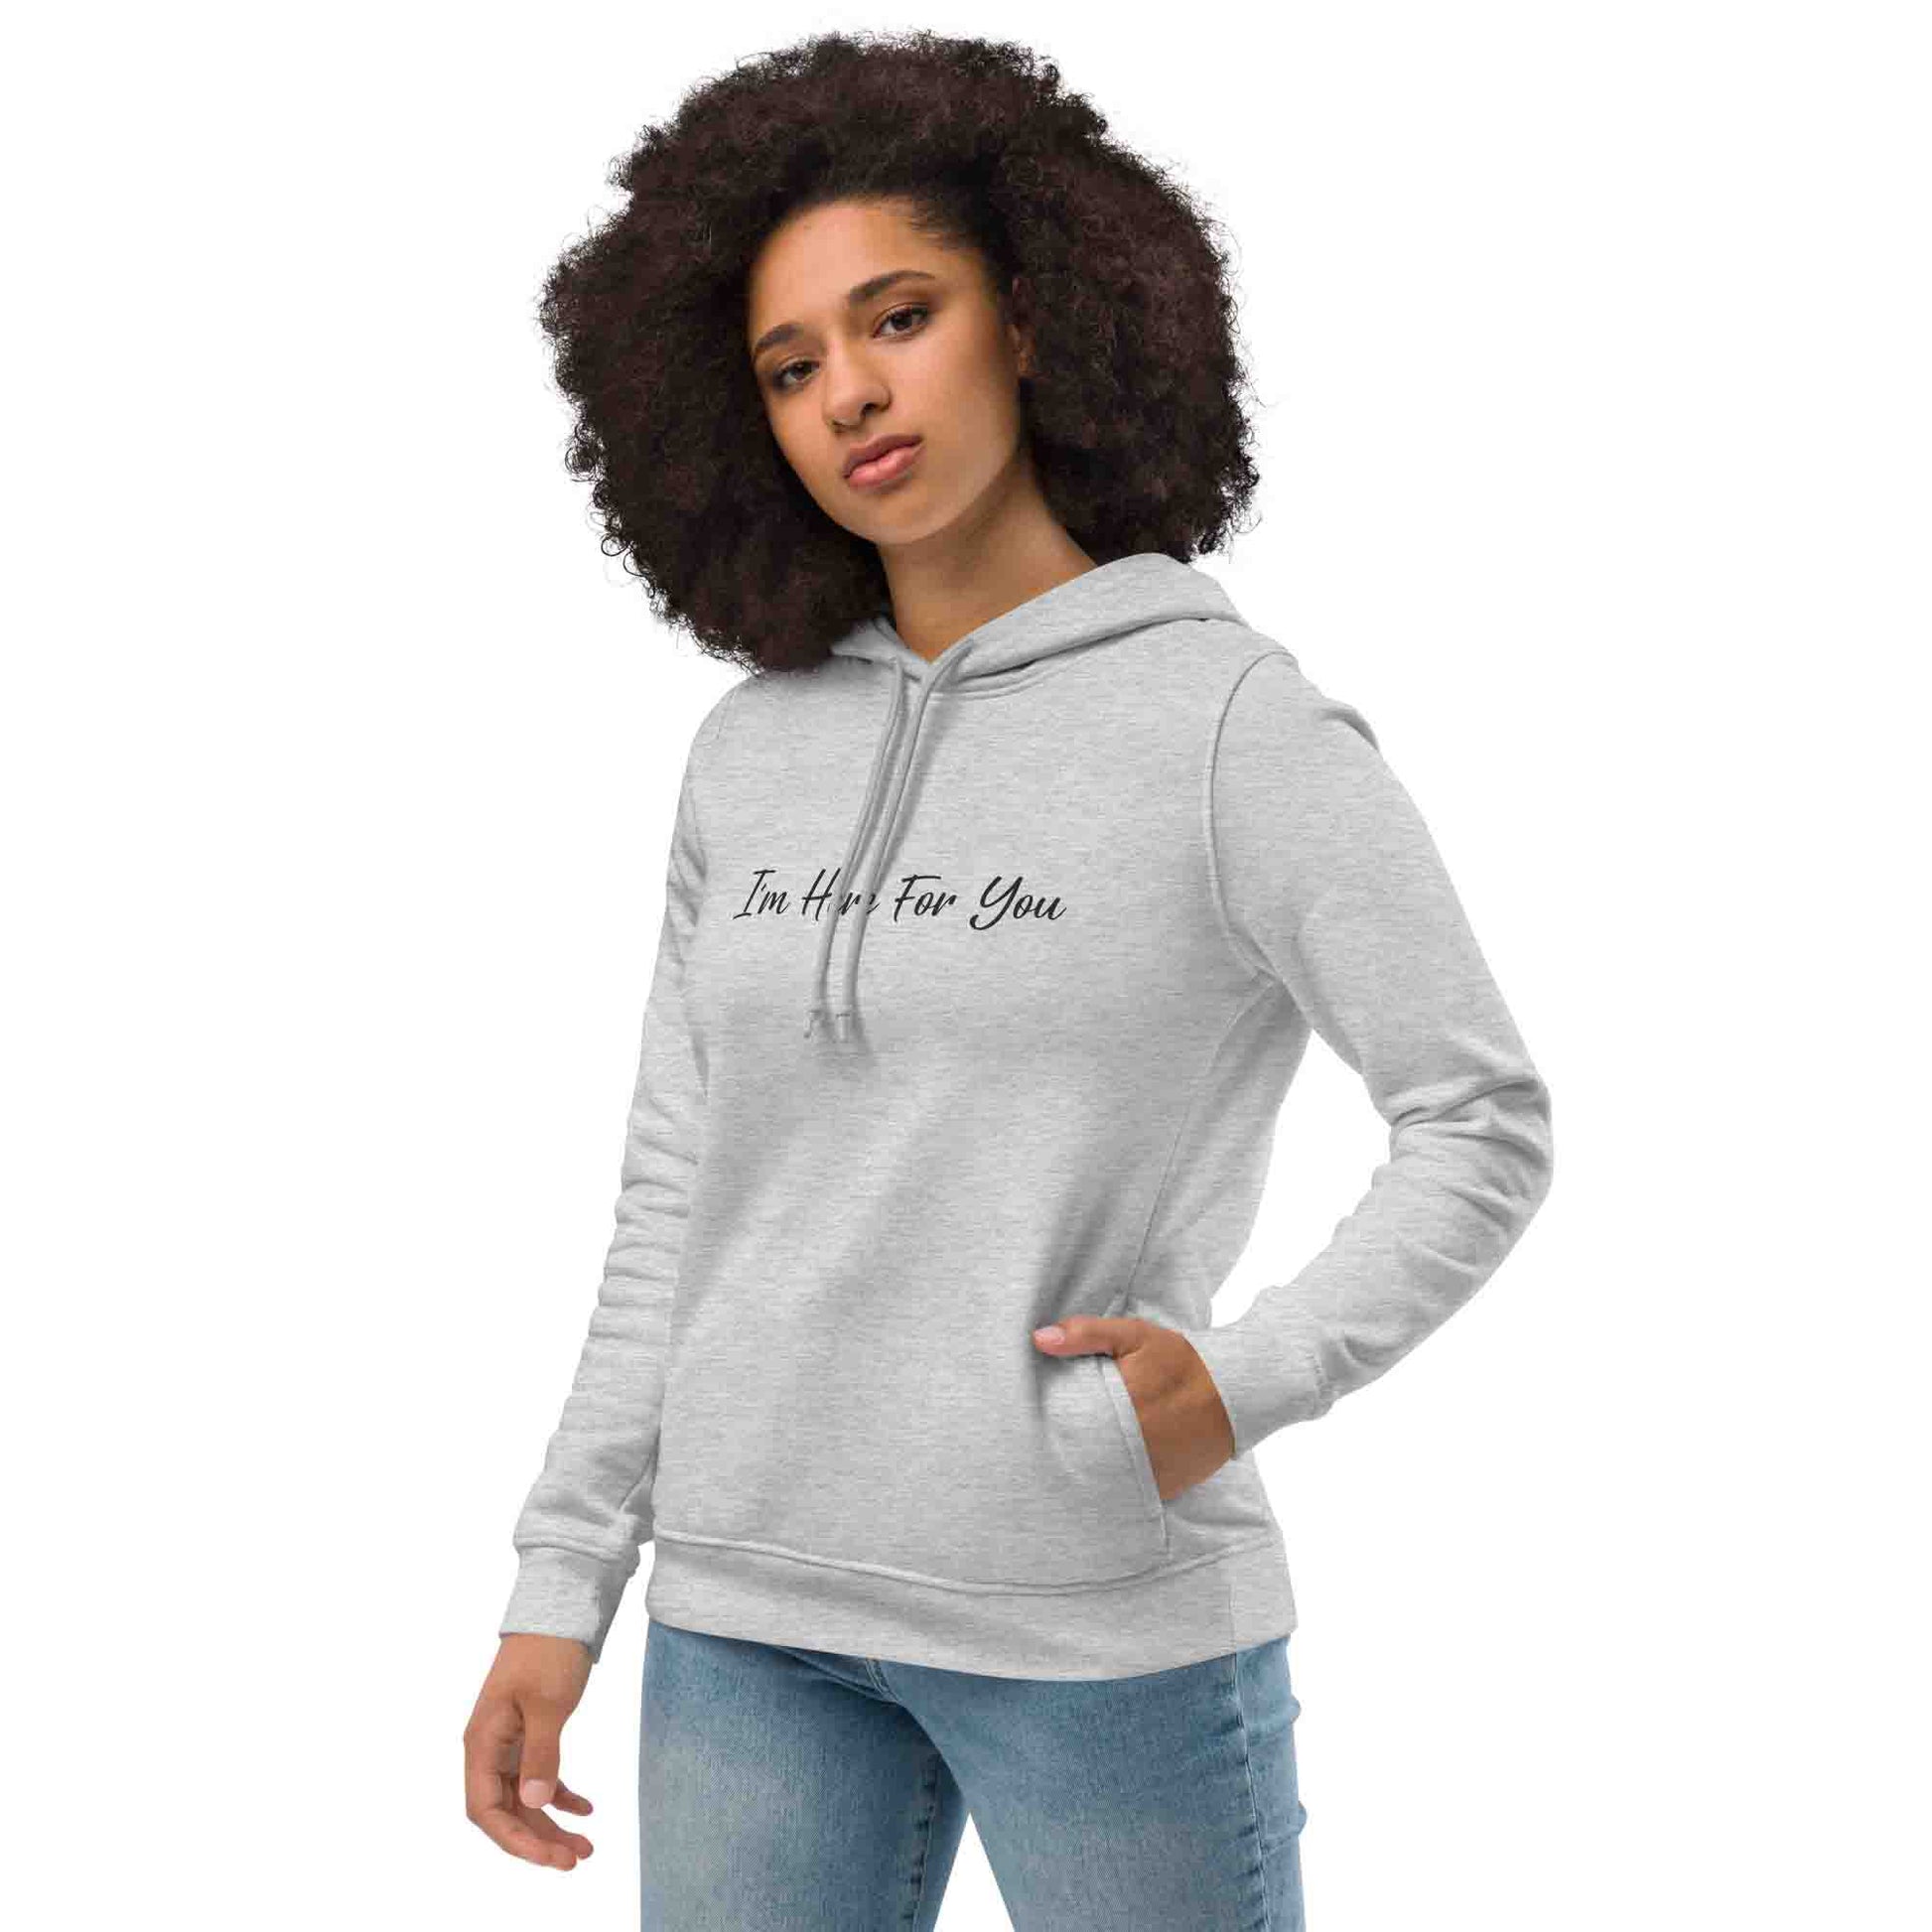 Women gray sustainable hoodie with inspirational quote, "I'm Here For You."